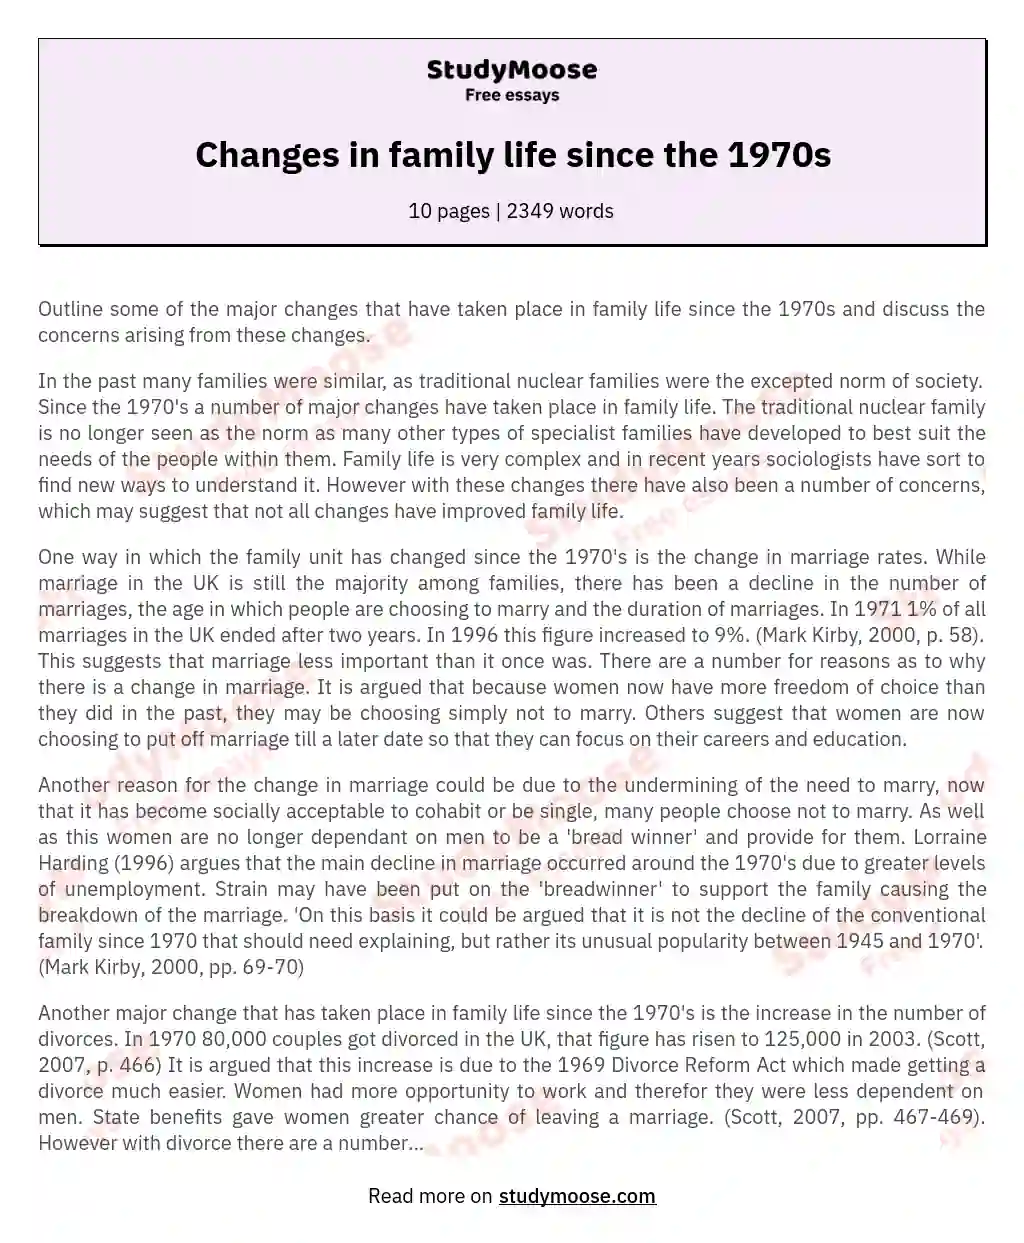 Changes in family life since the 1970s essay